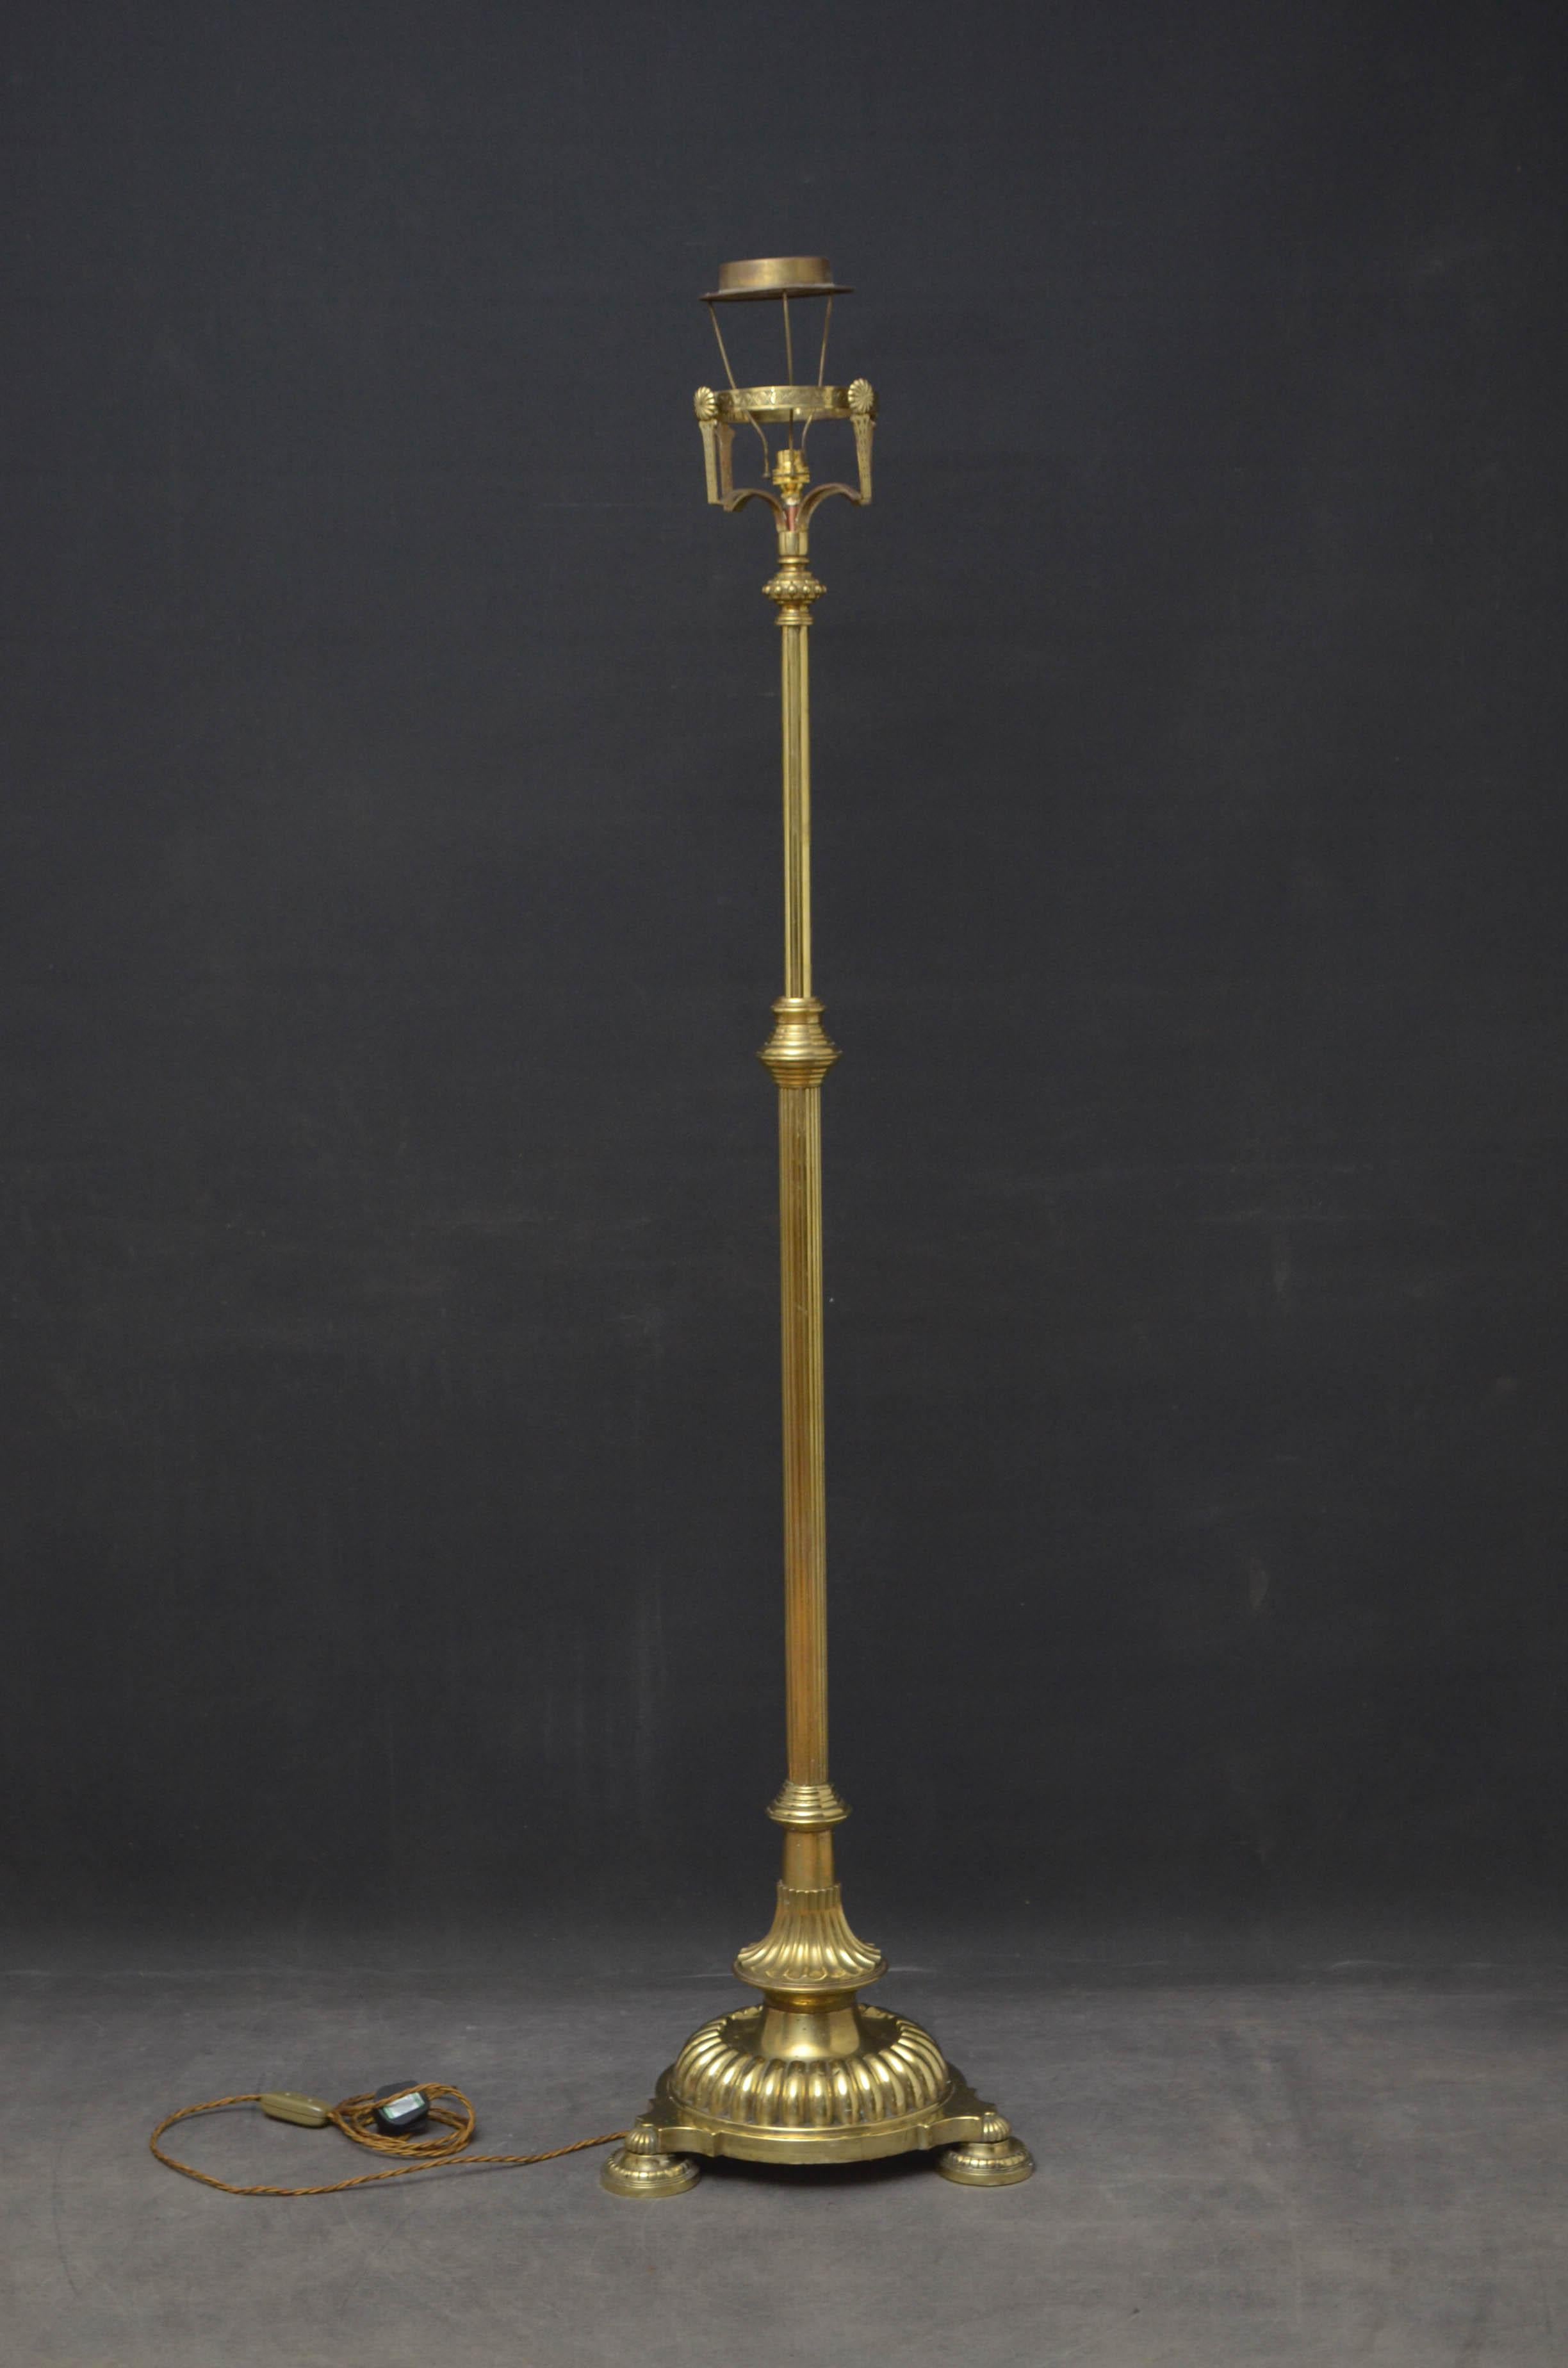 Sn4468 Victorian brass, height adjustable standard lamp, having cylindrical column rising from embossed base which terminates in 3 pad feet. This antique lamp has been rewired and PET tested. Lampshade not included, circa 1880
Measures: H 49-62